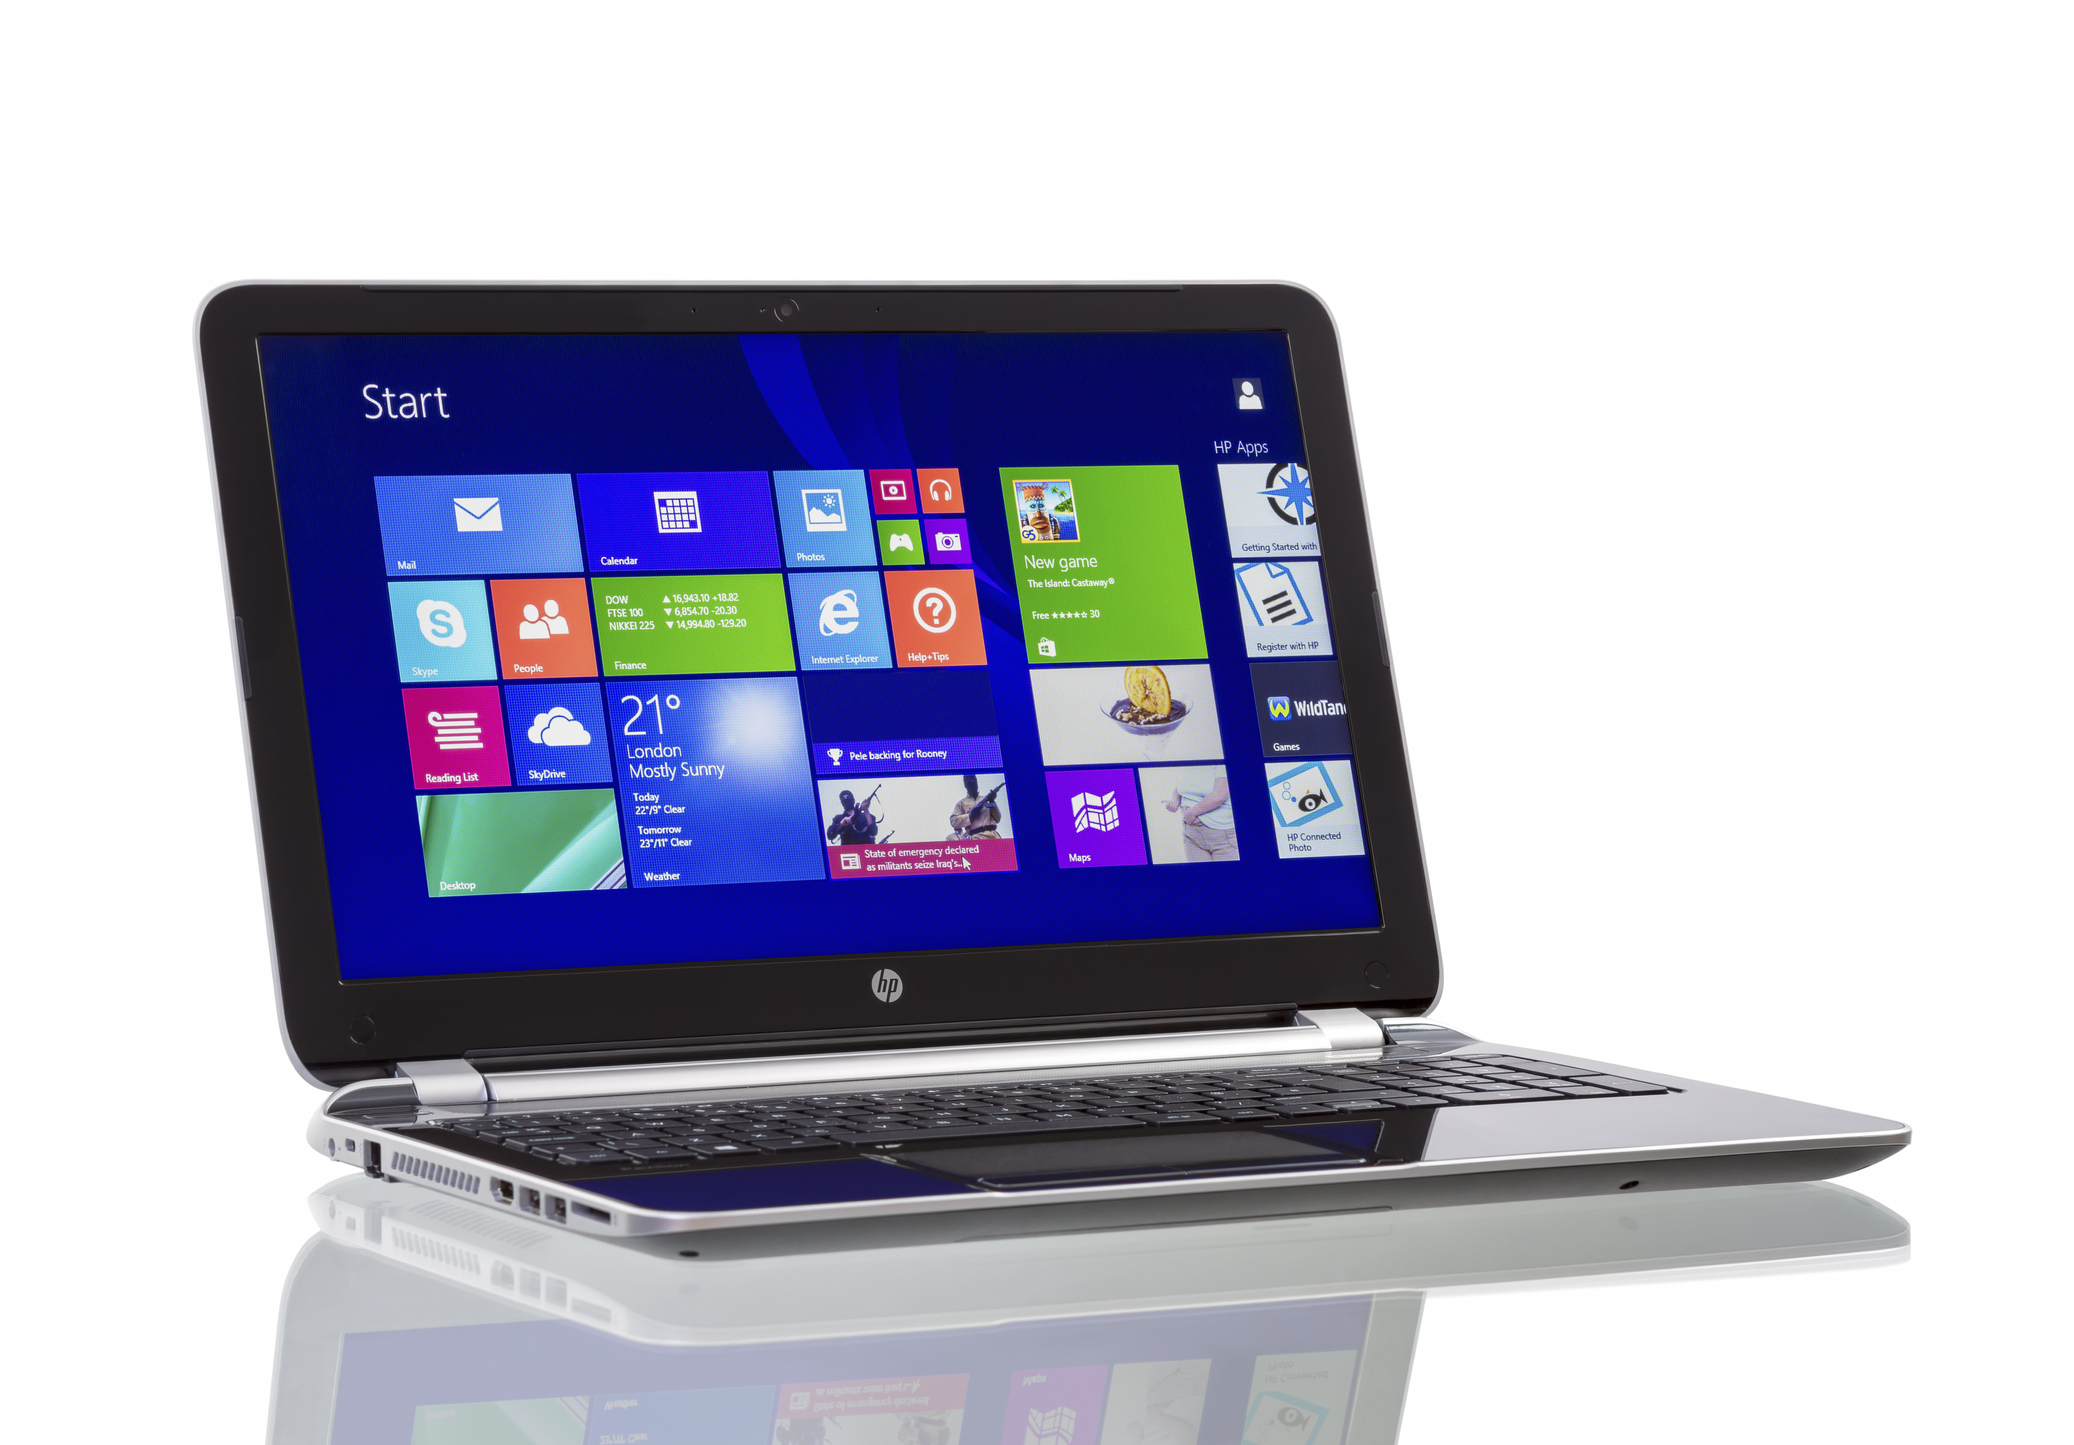 HP Pavilion 15-n230us Notebook PC (ENERGY STAR) with Windows 8.1, newest operating system from Microsoft.